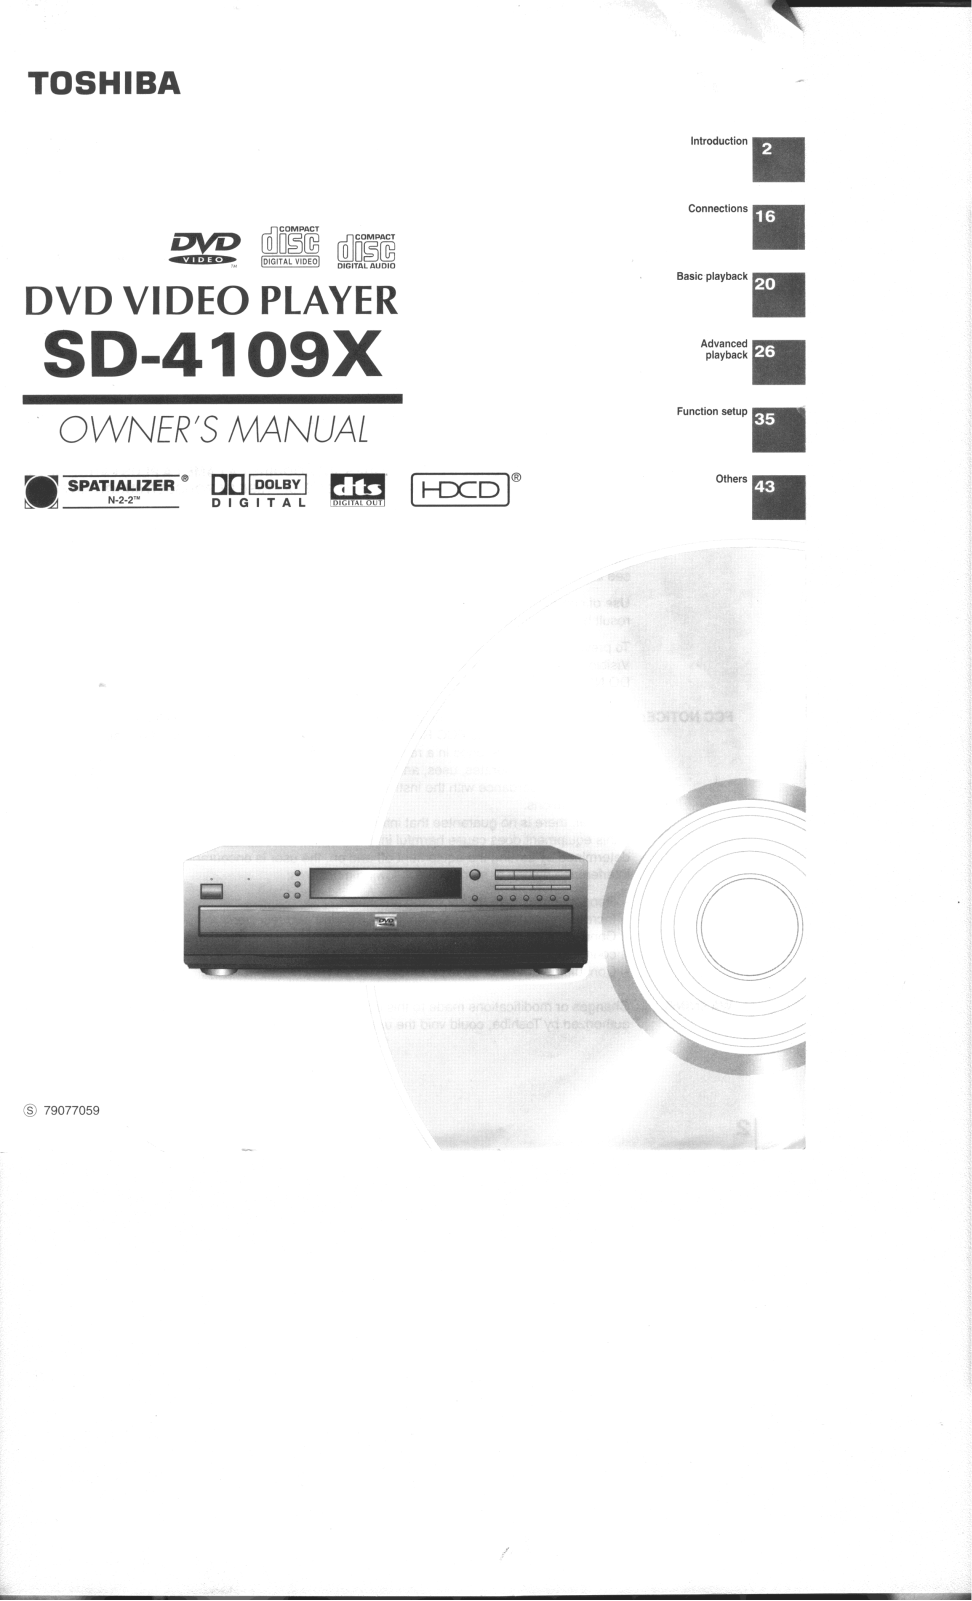 Toshiba SD-4109-X Owners manual